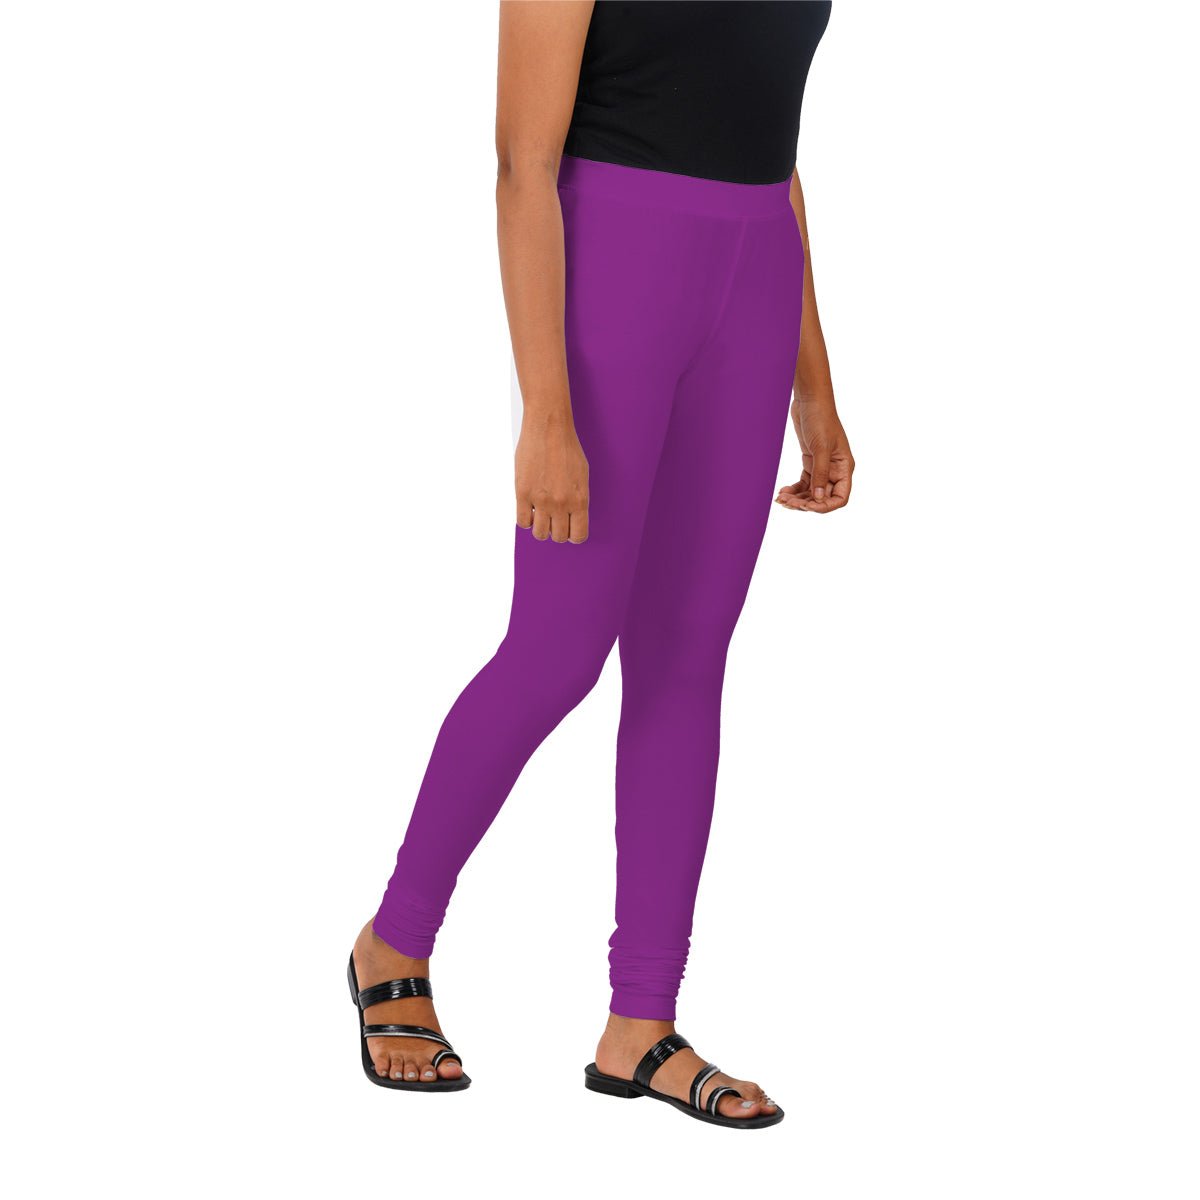 Poomer #Brandedleggins #Clothing Feel all day comfort Premium leggins at  just Rs.360/- available in multi colours Log on to CostKing